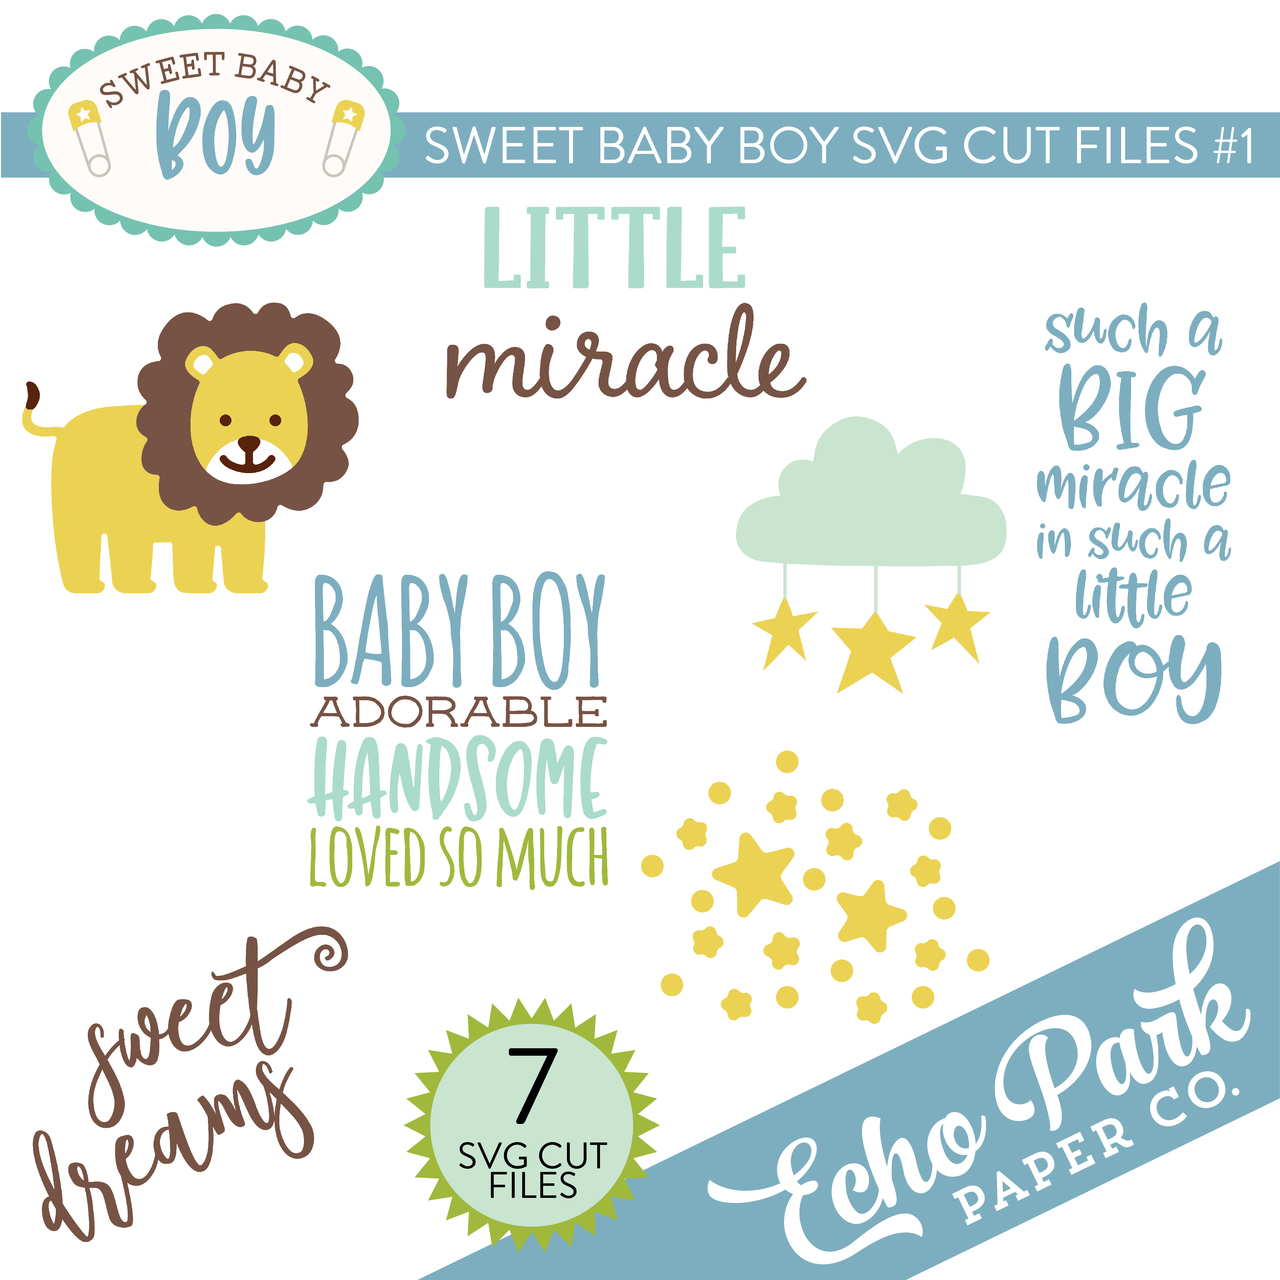 Sweet Baby Boy Svg Cut Files 1 Snap Click Supply Co